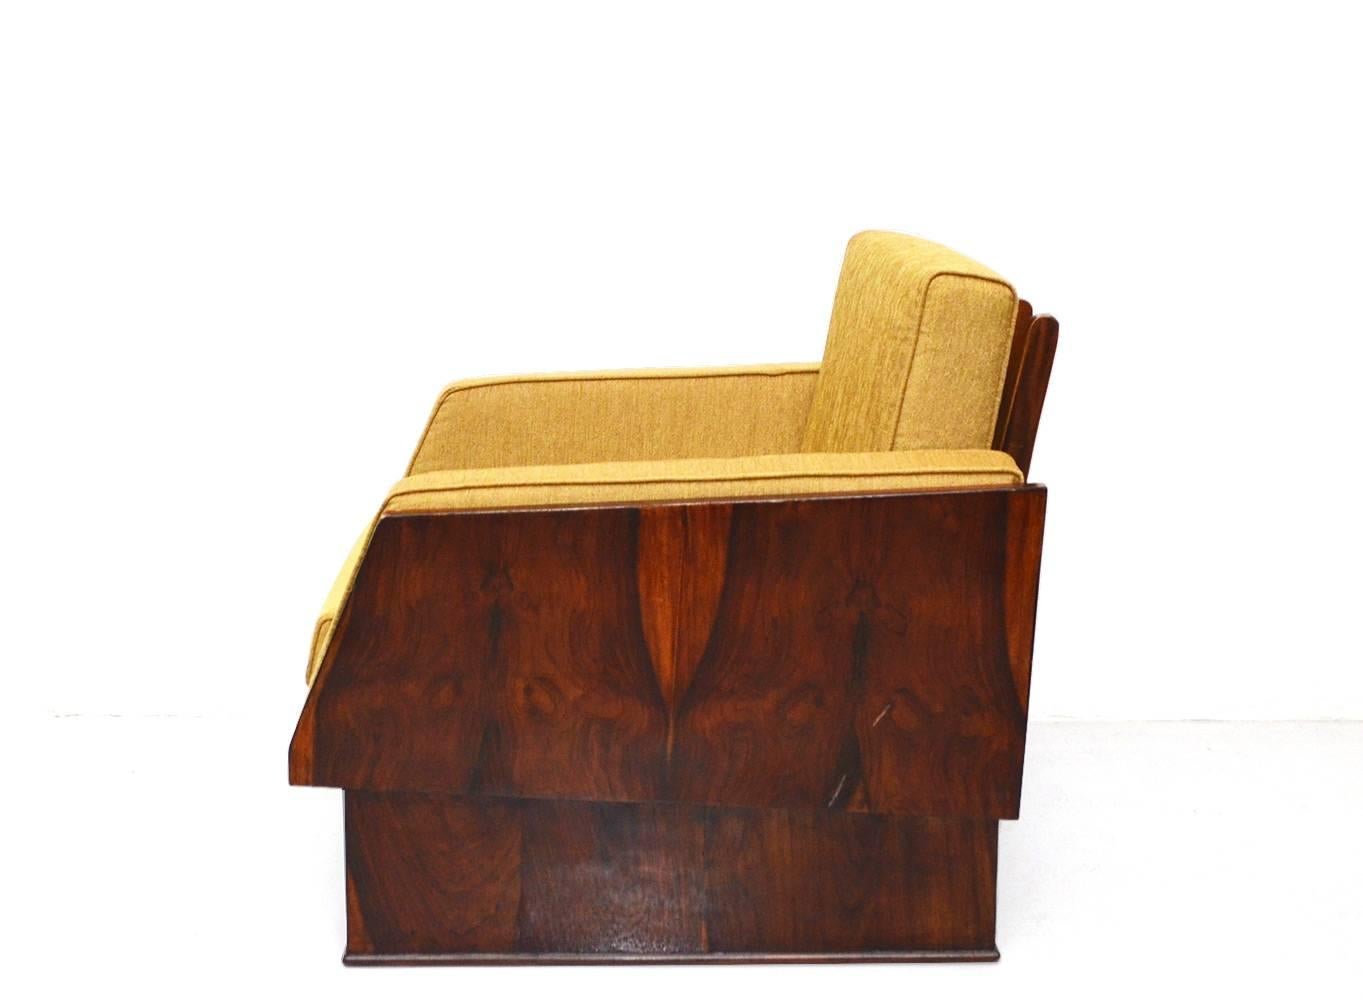 A beautiful example of the style and craftsmanship of Novo Rumo, a design ateliê extremely active during the 1950s and 1960s in São Paulo, Brazil. Made of Brazilian hardwood, the minimalist structure and the series of skeletal fins along the back